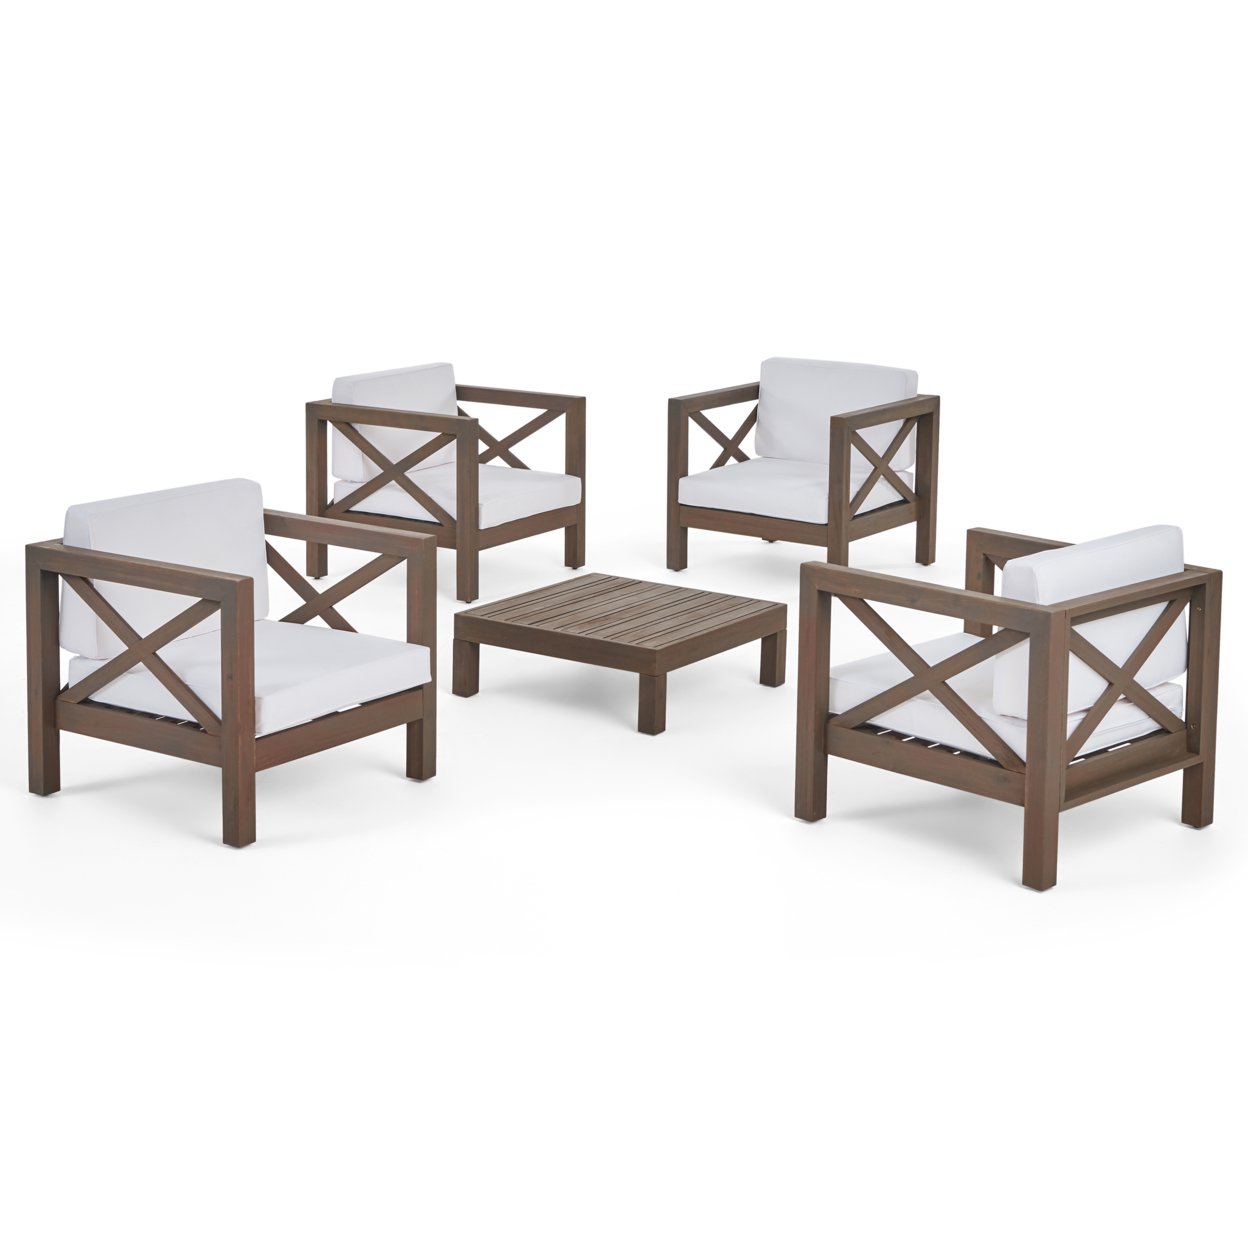 Morgan Outdoor 4 Seater Acacia Wood Club Chair and Coffee Table Set - gray finish + white